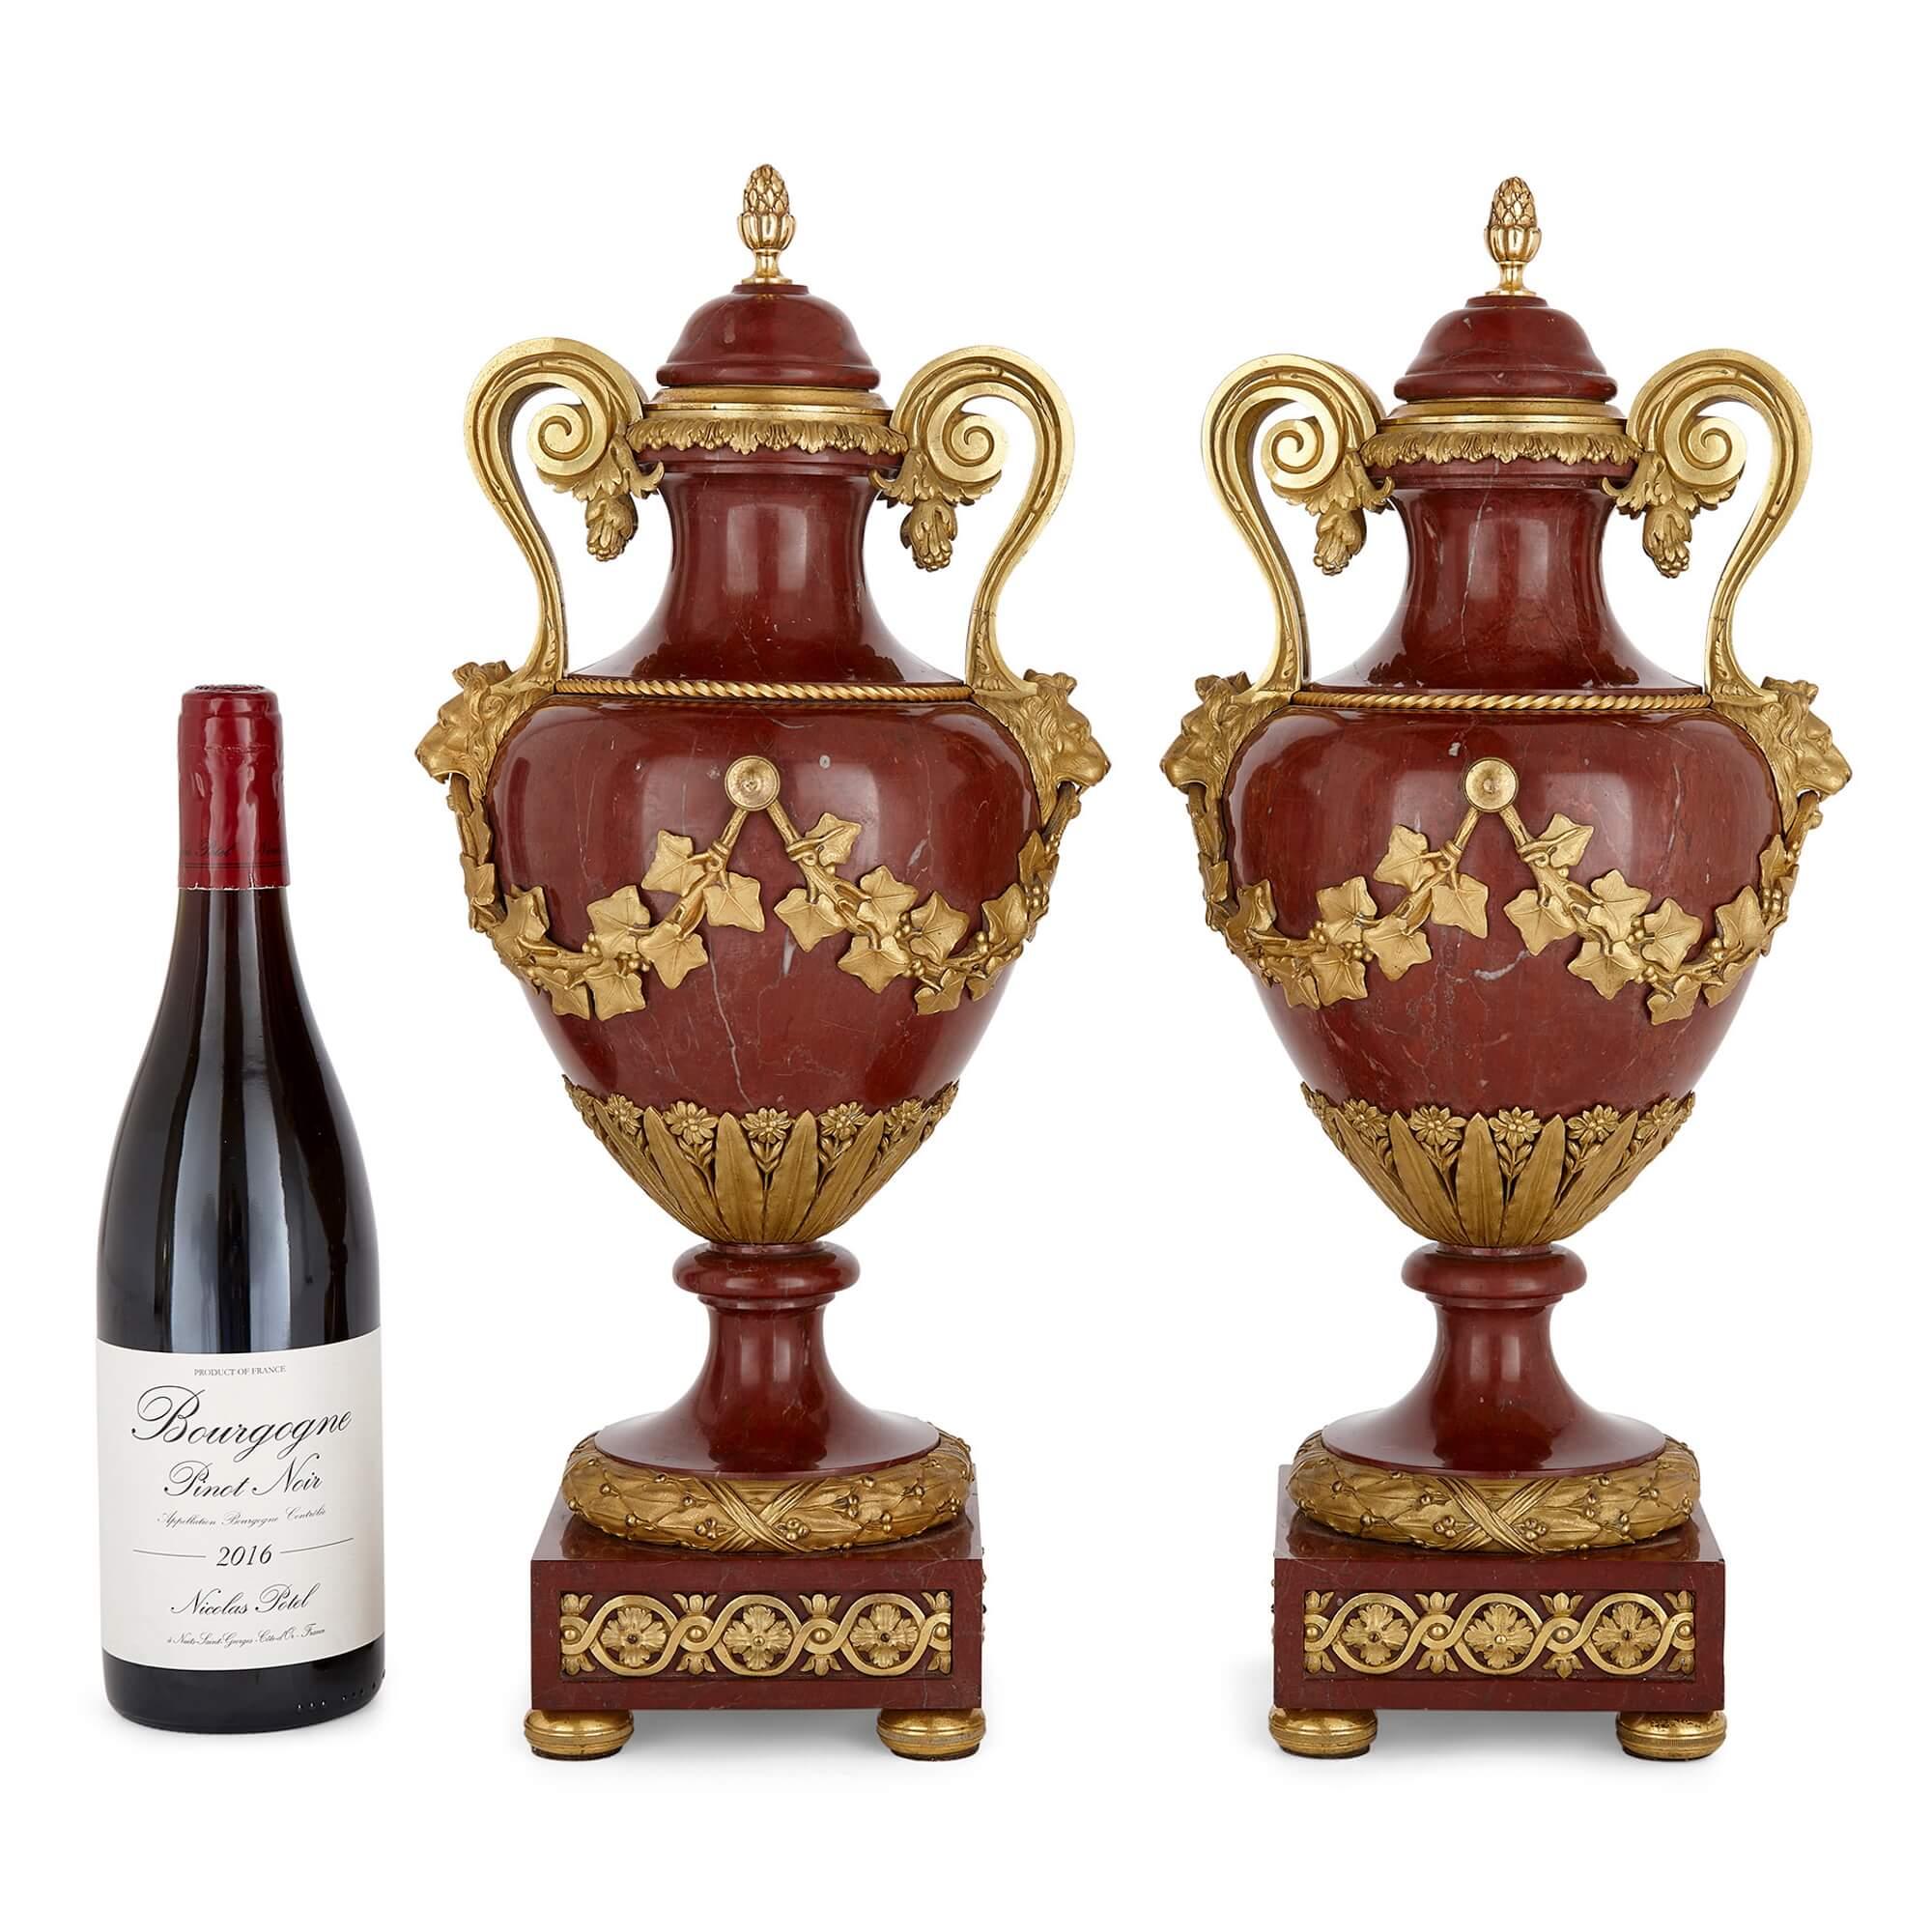 Pair of Large Red Marble and Ormolu Vases by Dasson 1